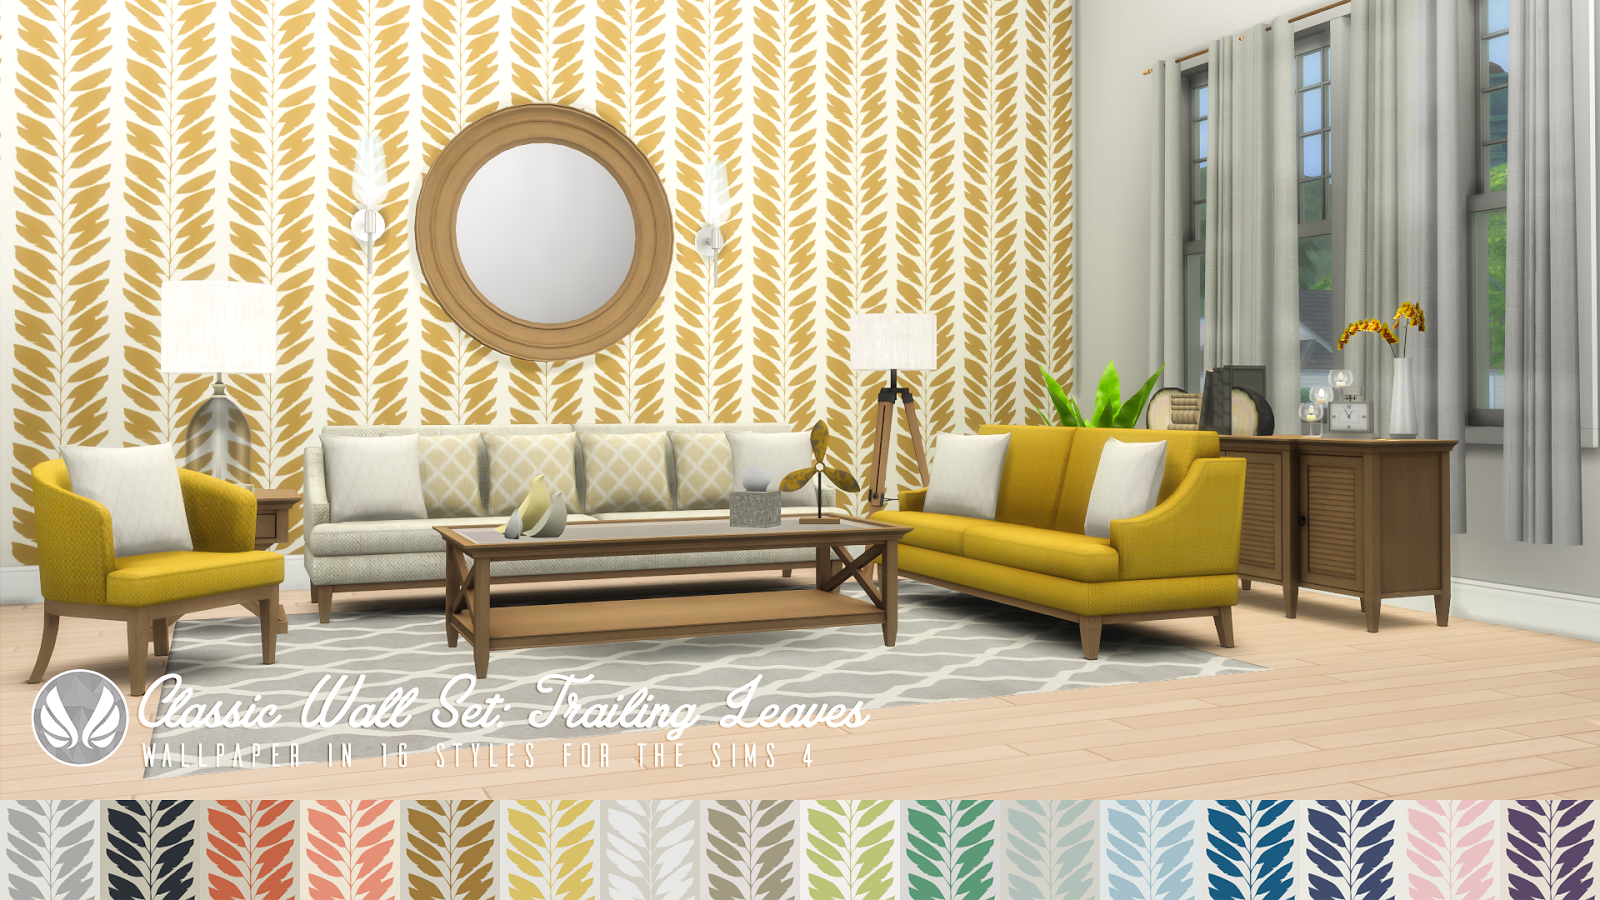 Mod The Sims  Four Victorian Dayroom Wallpapers with MaxisMatch Painted  Wainscoting